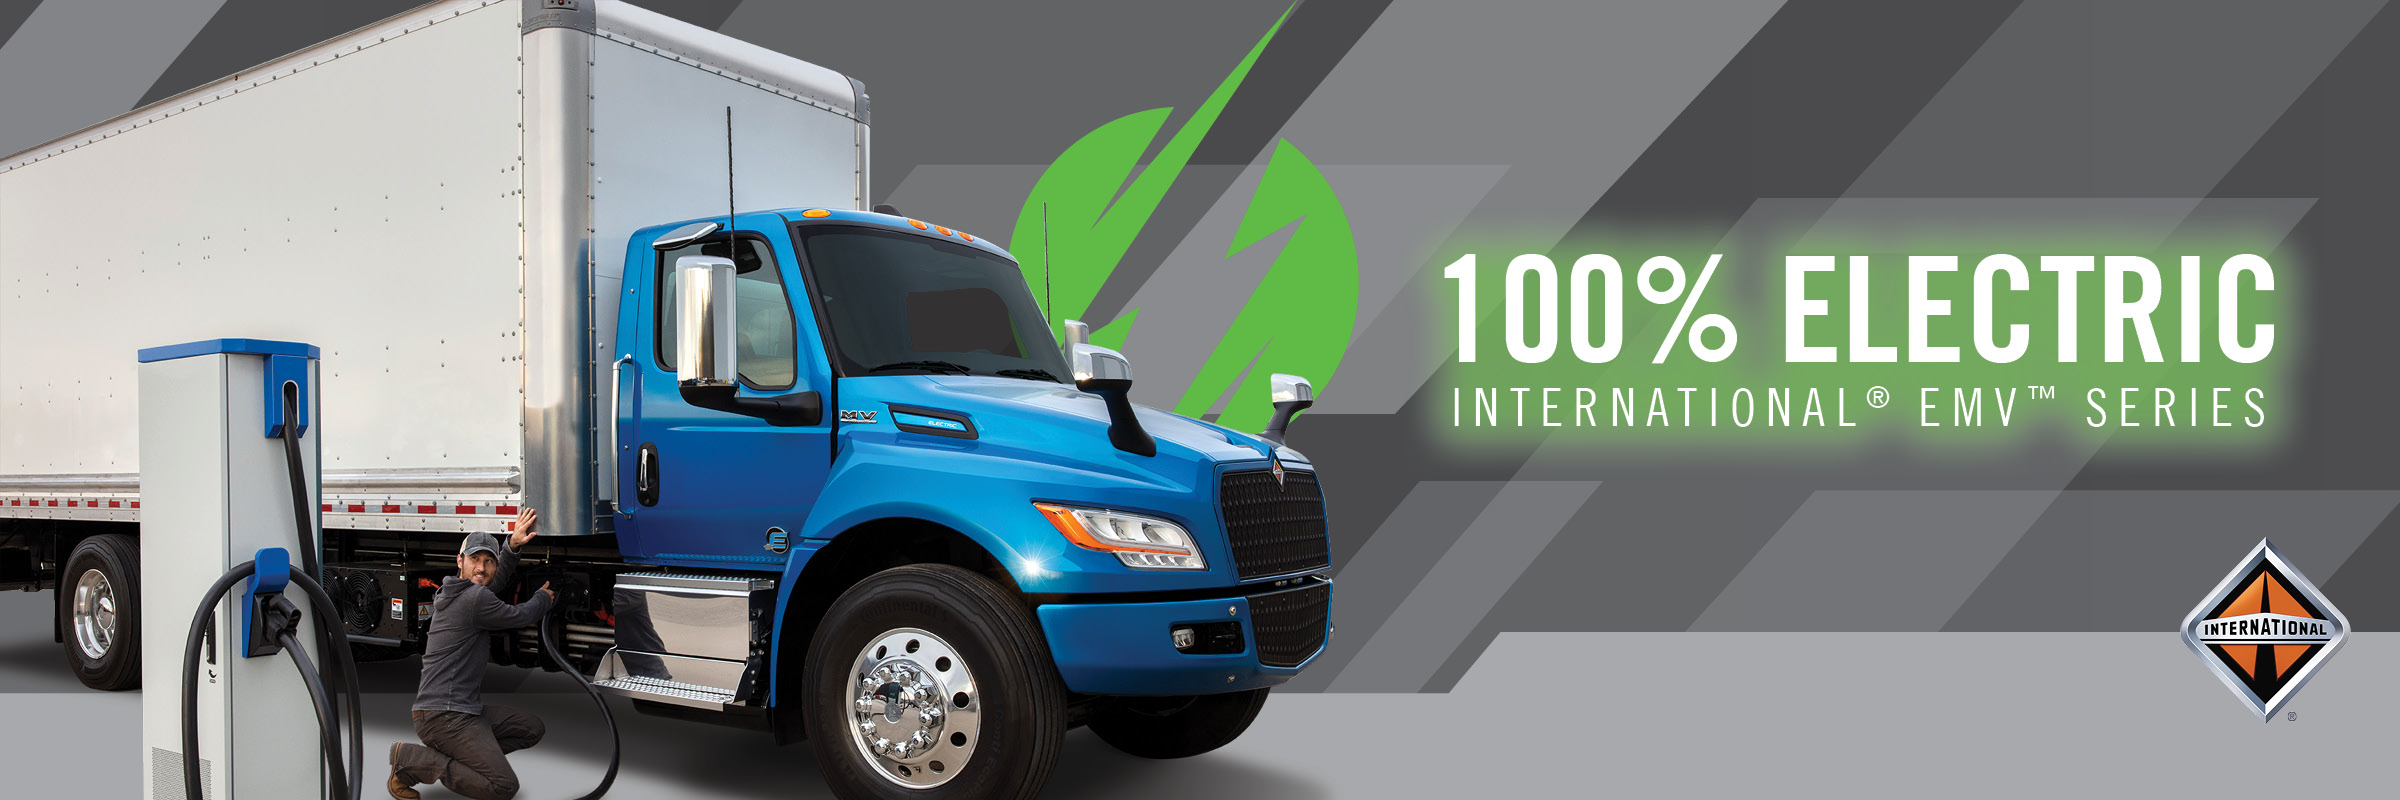 100% Electric International eMV Series truck being charged by driver